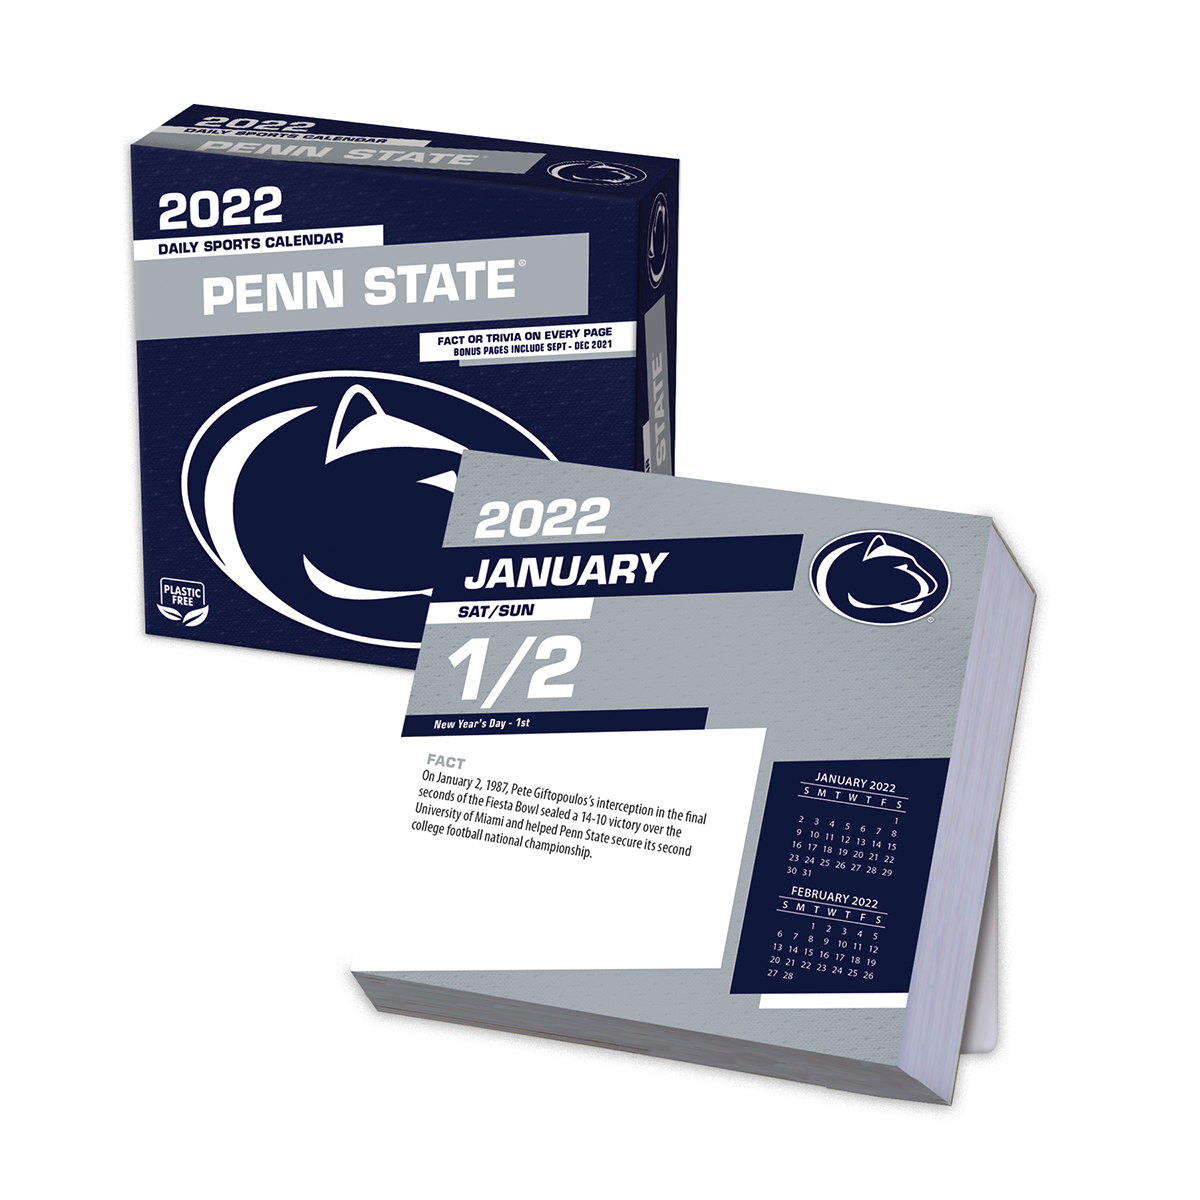 Penn State Calendar 2022 Penn State Nittany Lions 2022 Page-A-Day Box Calendar - Buy At Khc Sports